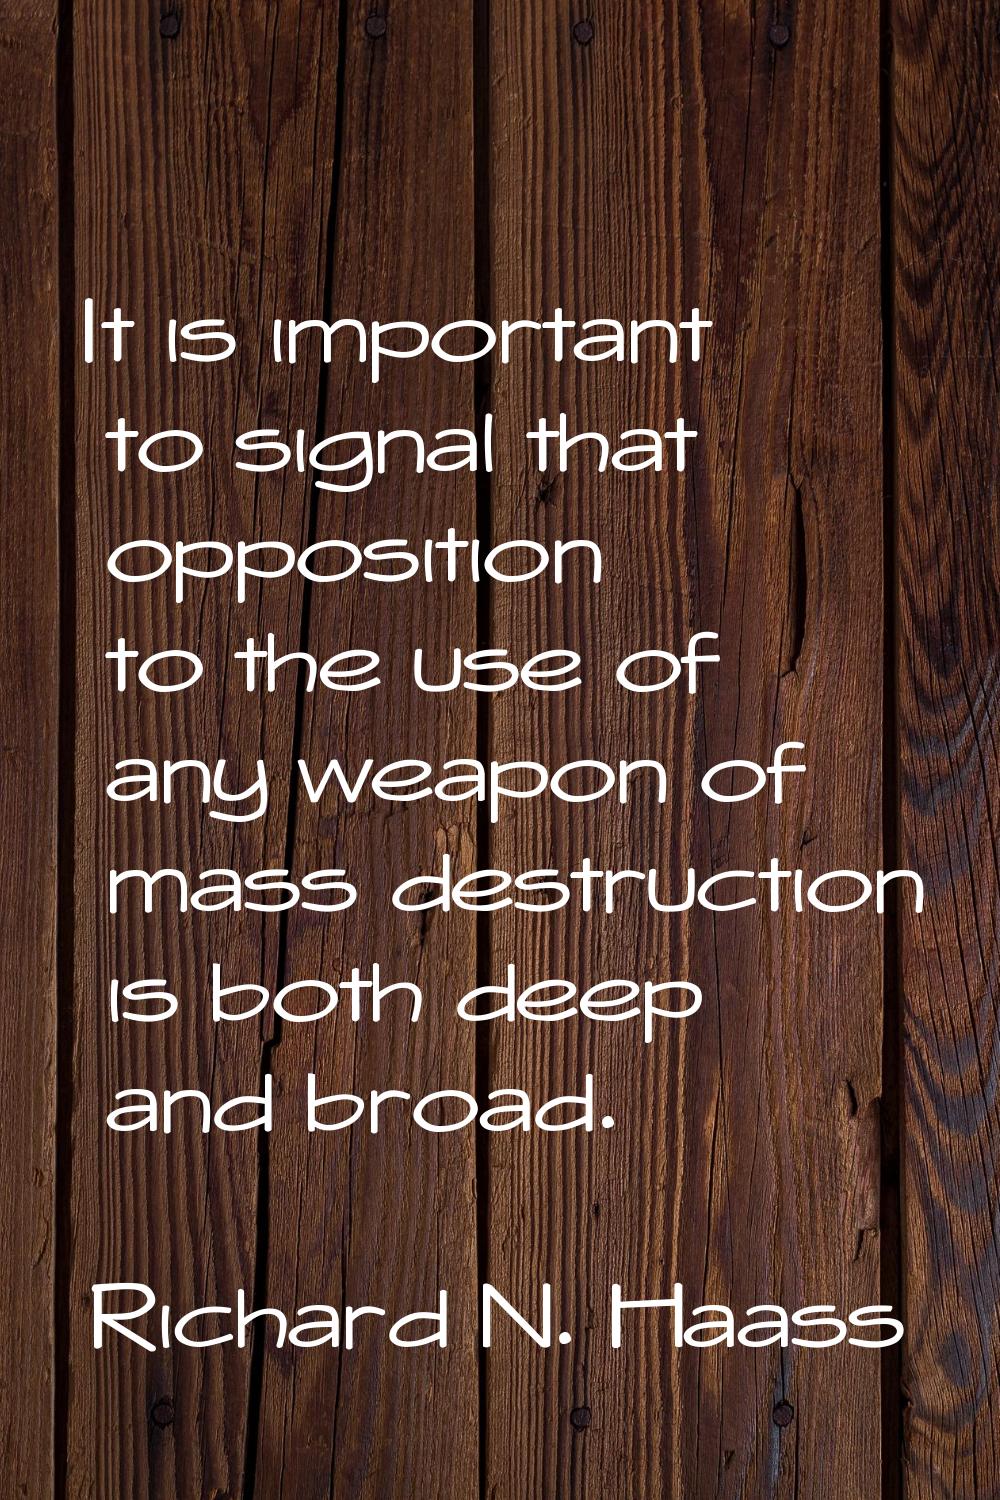 It is important to signal that opposition to the use of any weapon of mass destruction is both deep